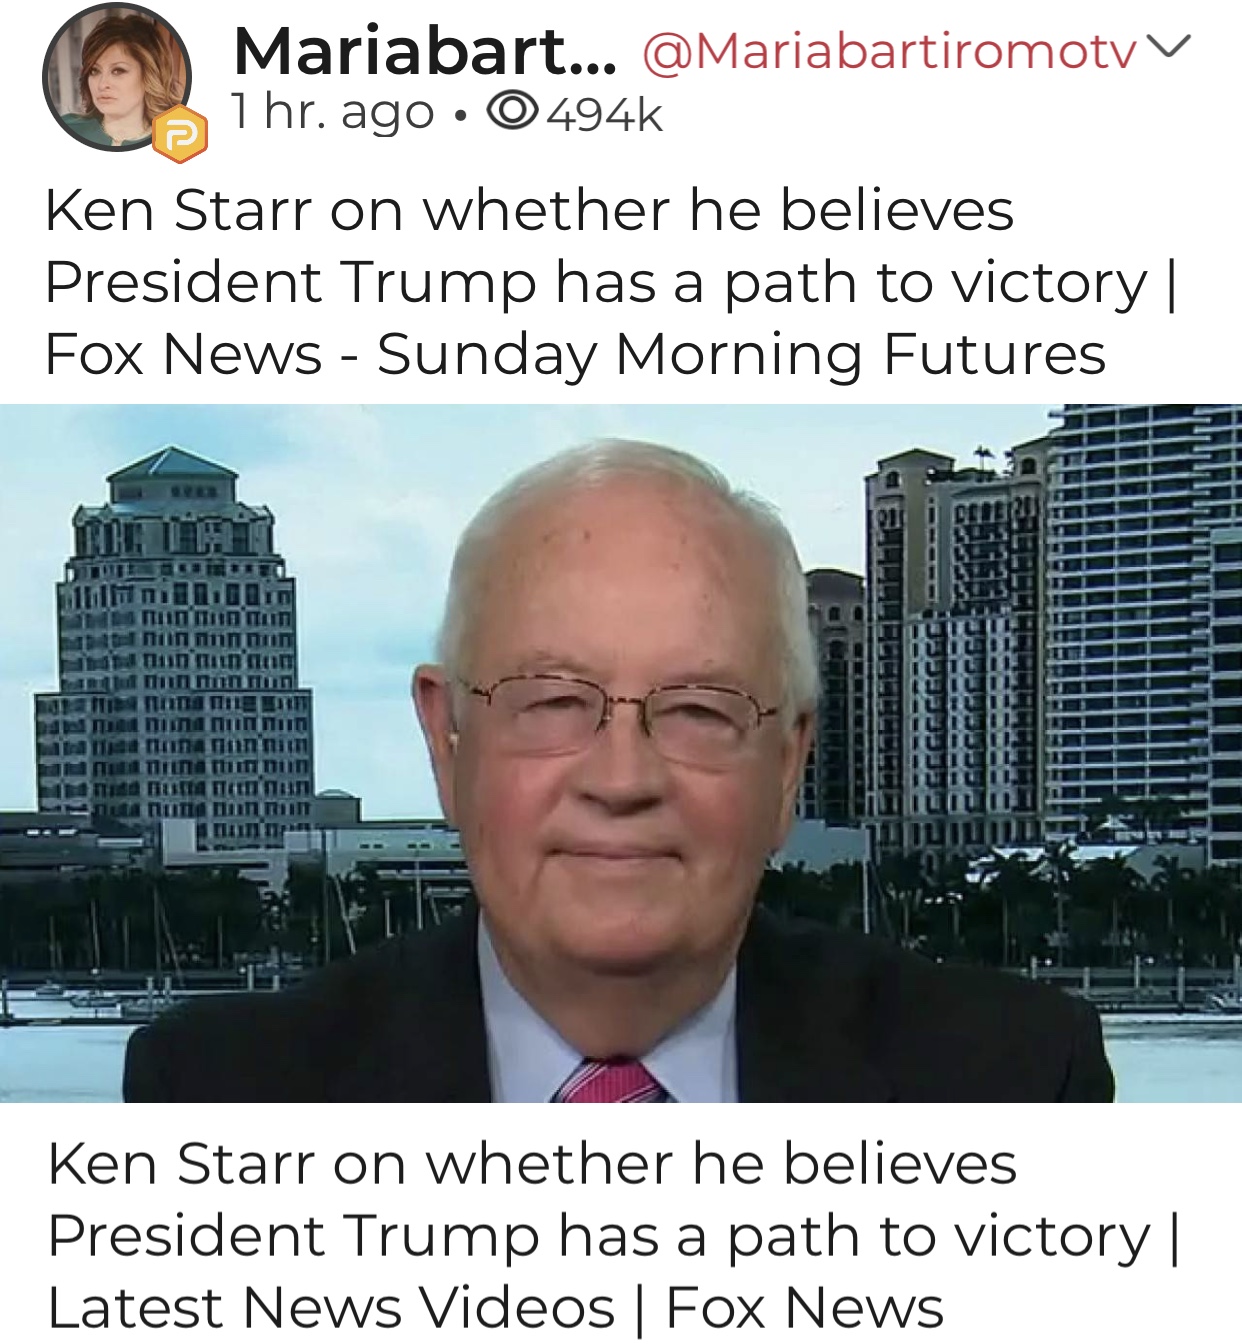 Ken Starr on Whether President Trump Has A Path to Victory